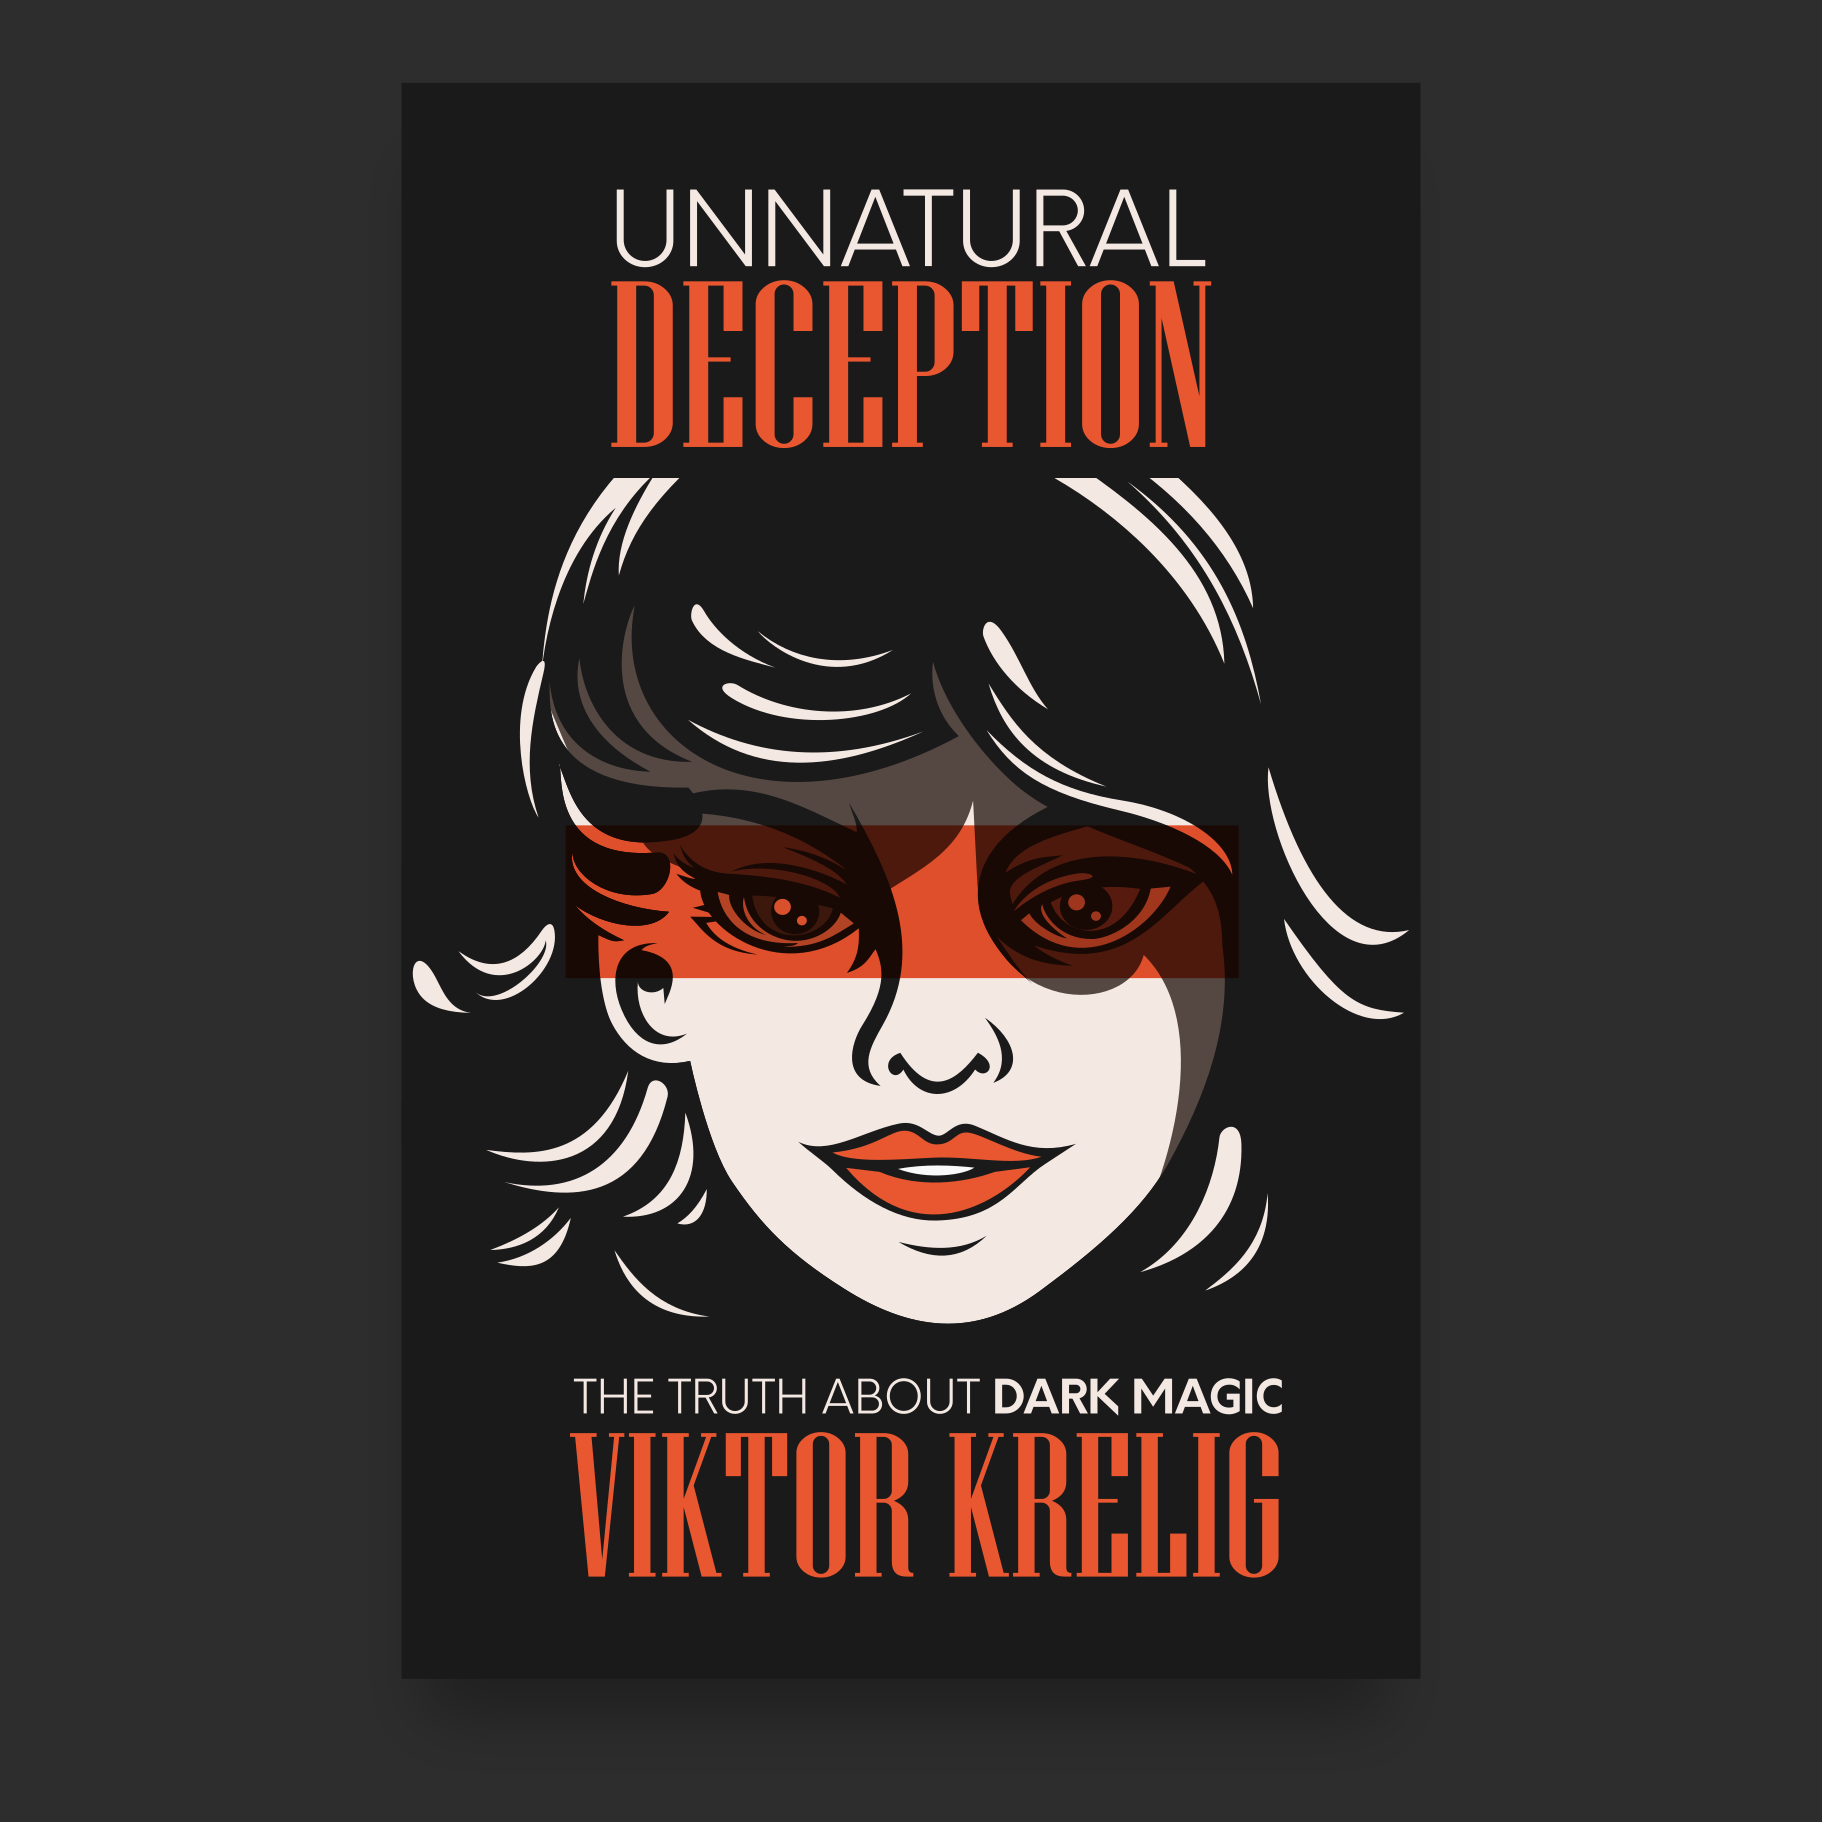 Book cover design for Unnatural Deception. Designed by Johnery